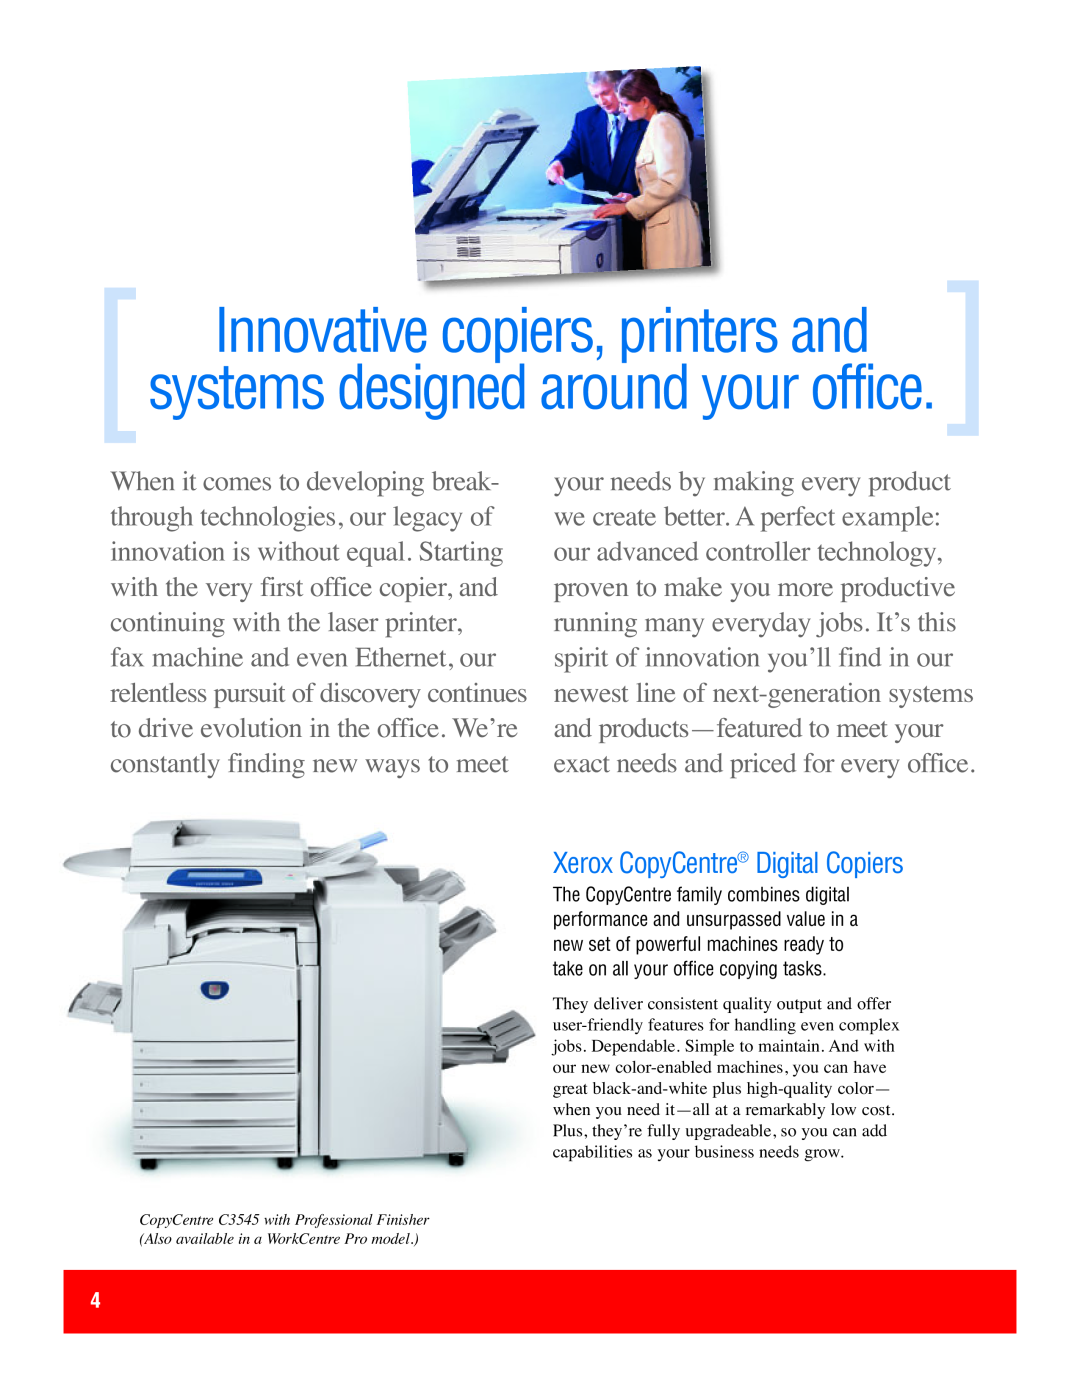 Xerox C3545, 275 Xerox CopyCentre Digital Copiers, Innovative copiers, printers and, systems designed around your office 